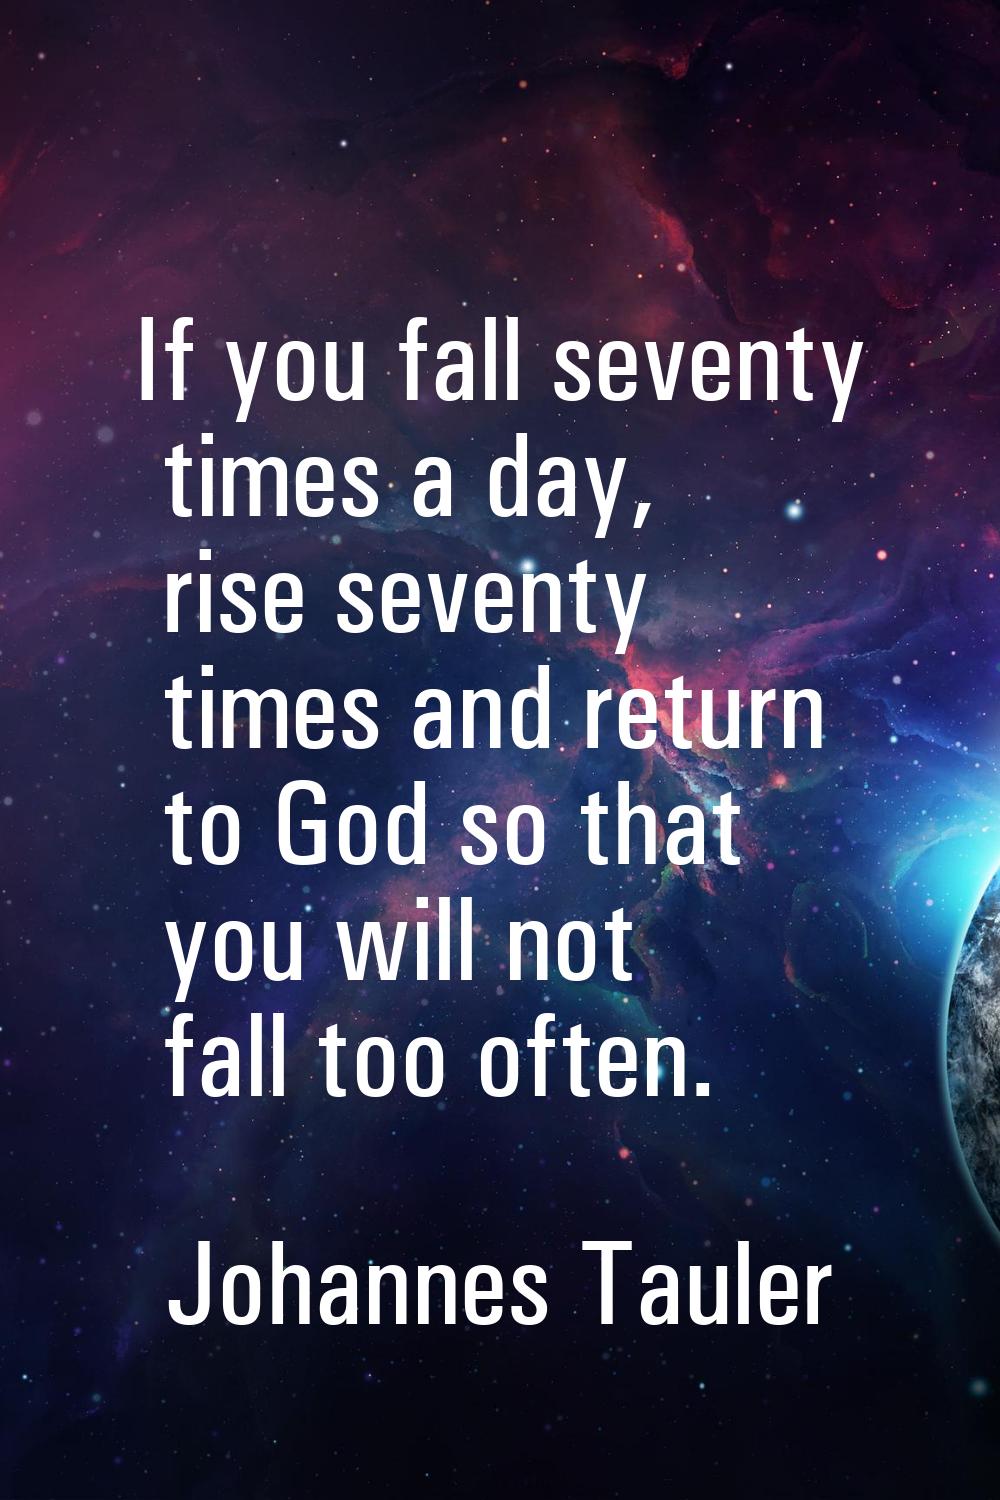 If you fall seventy times a day, rise seventy times and return to God so that you will not fall too